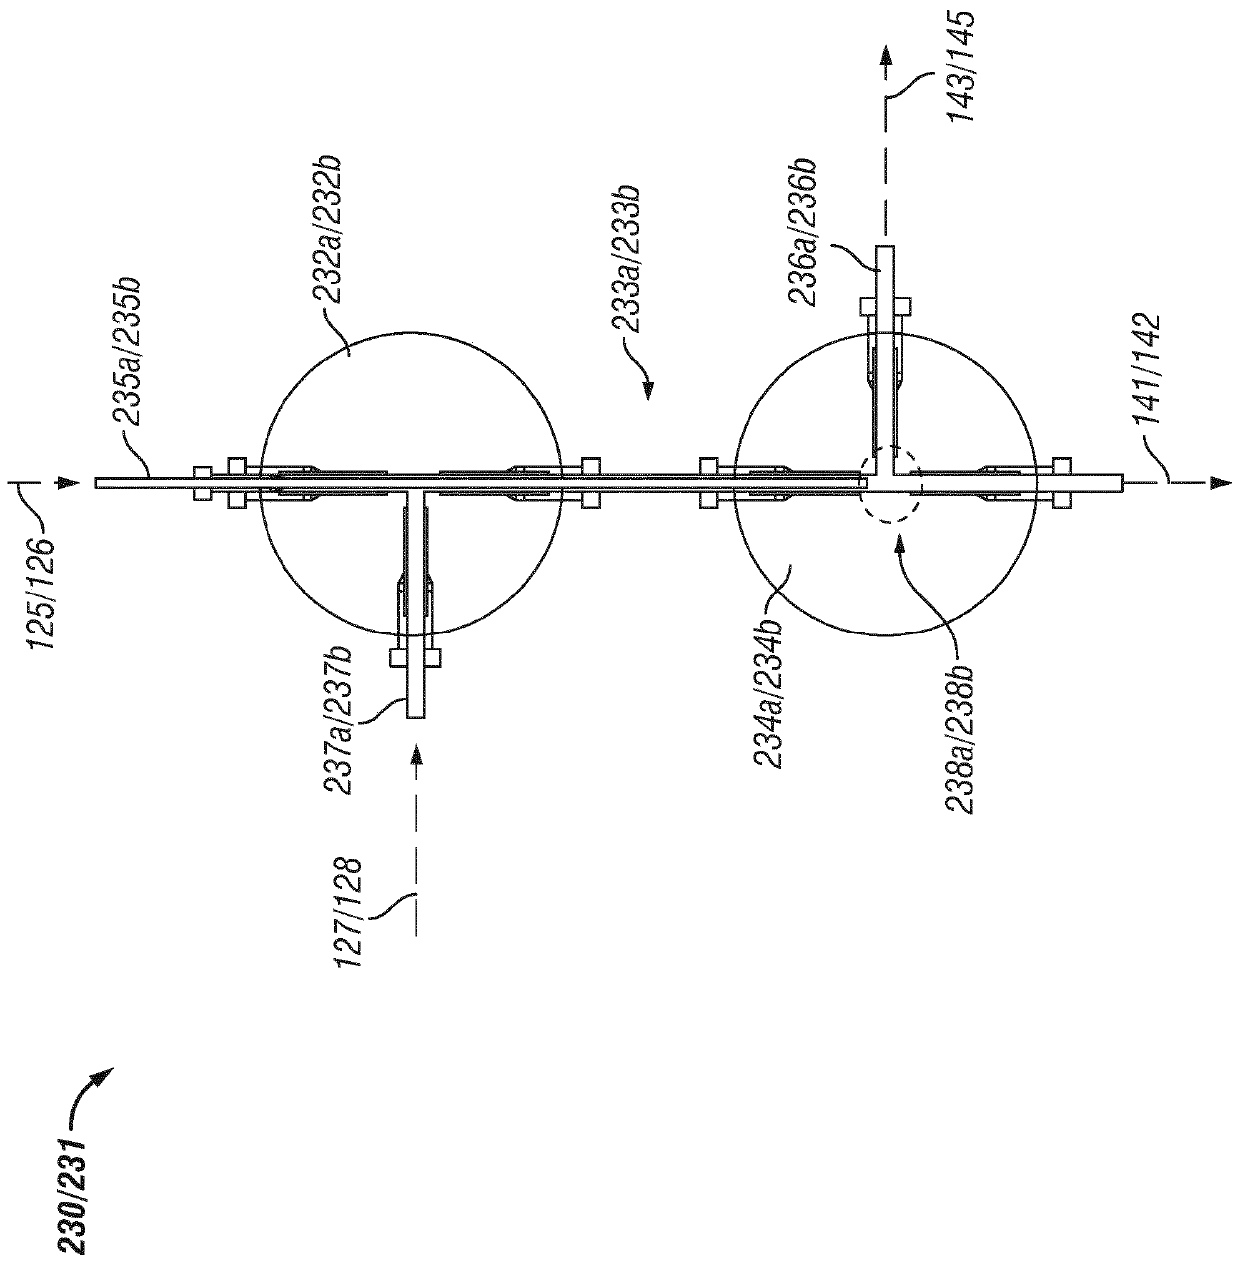 Method and apparatus for quantitatively analyzing gaseous process stream